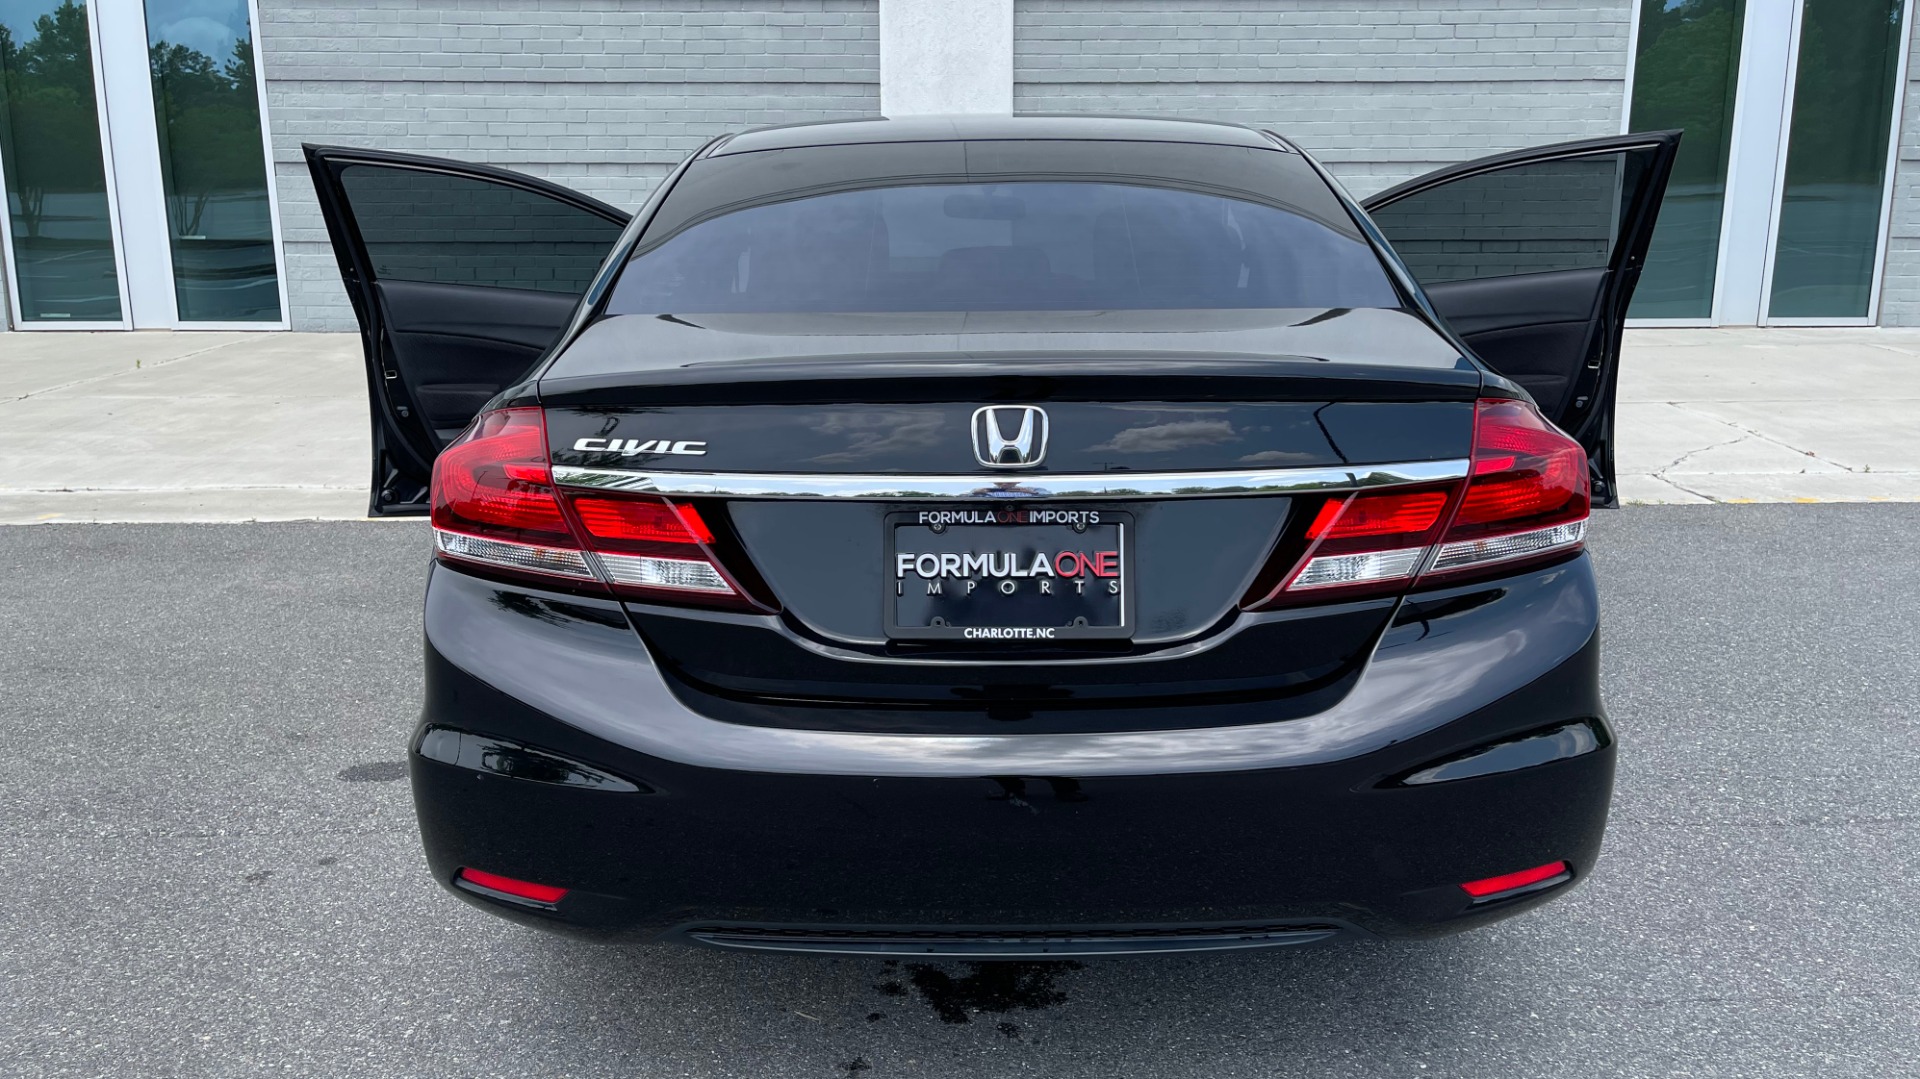 Used 2013 Honda CIVIC SEDAN LX / 5-SPD AUTO / 1.8L 4-CYL / BLUETOOTH / AIR CONDITIONING for sale Sold at Formula Imports in Charlotte NC 28227 27